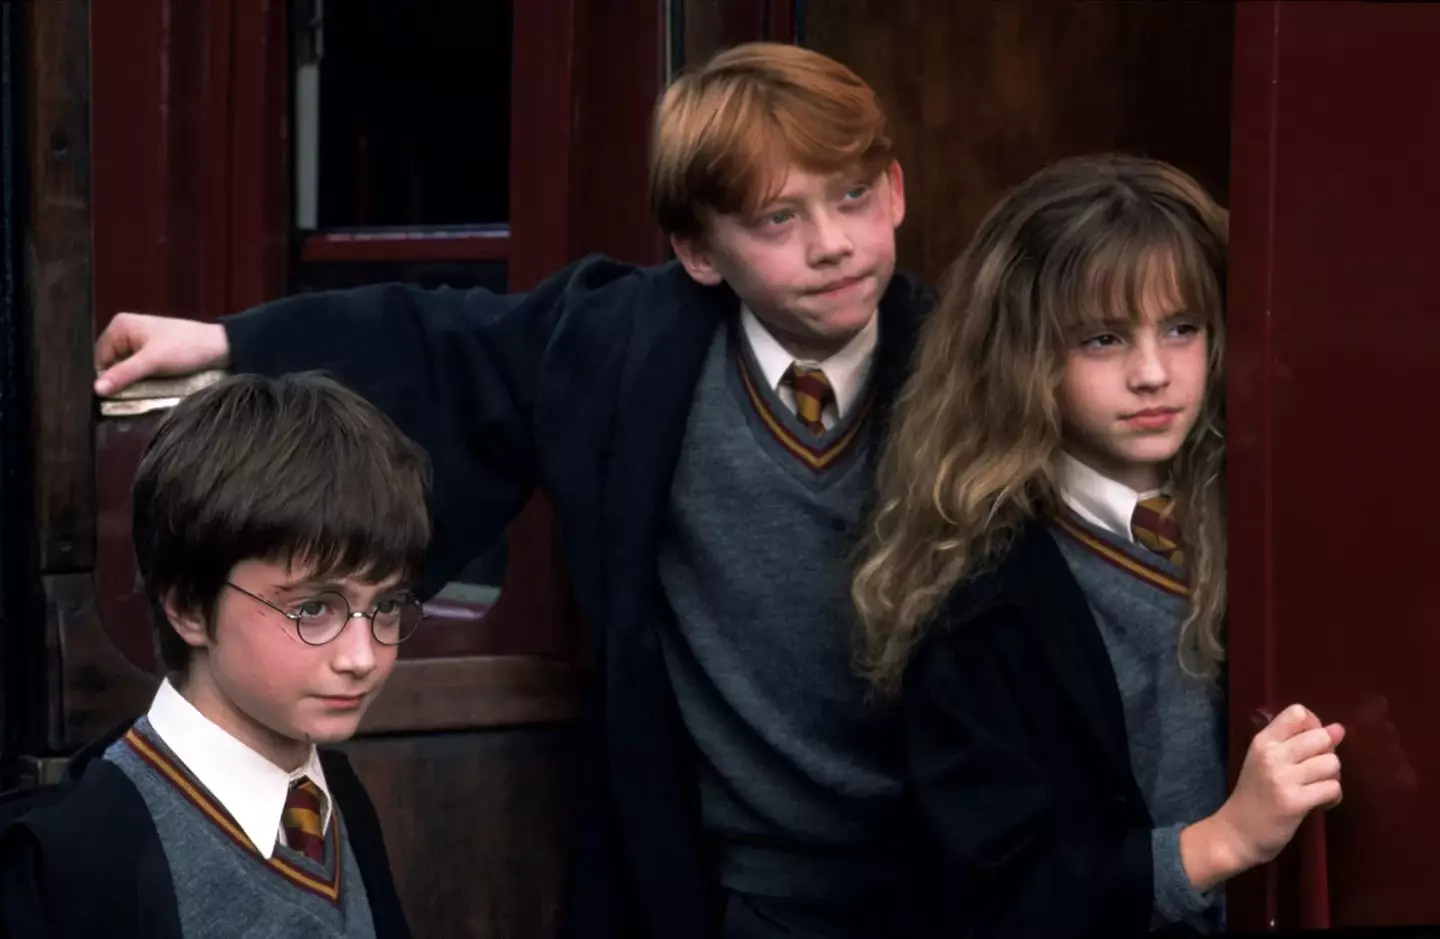 The Harry Potter stars have voiced their support for the trans community.